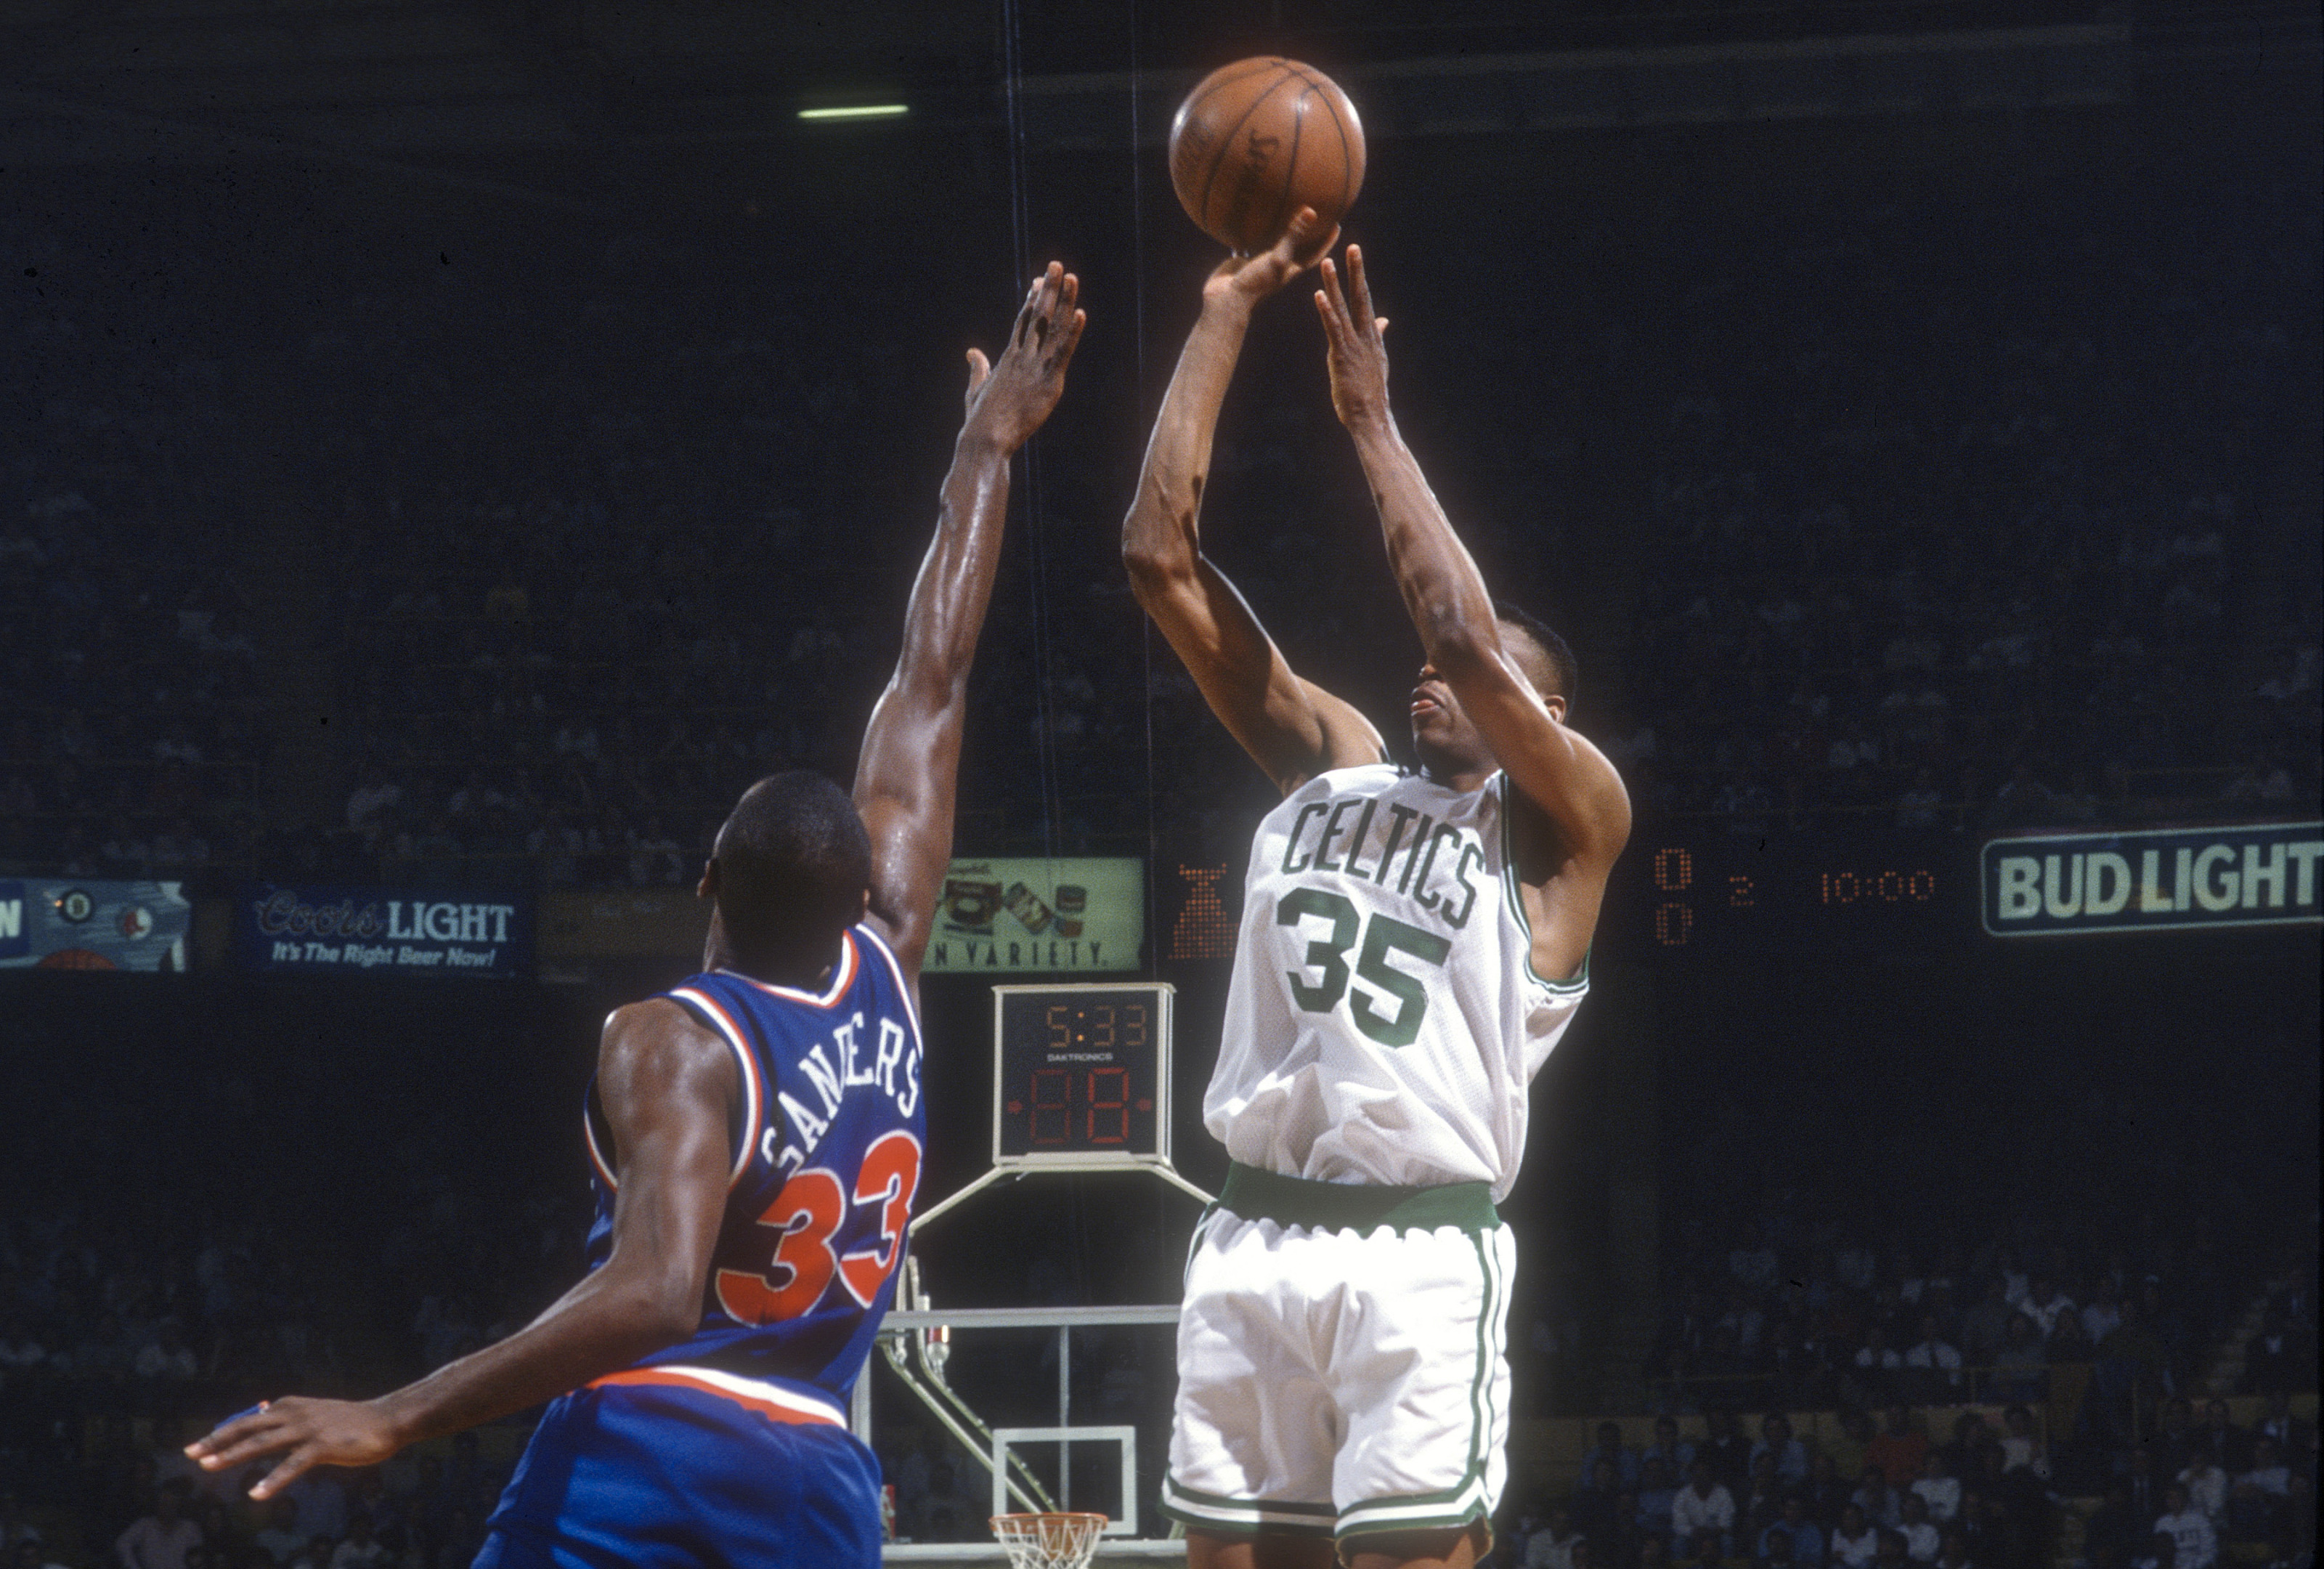 Michael Jordan Was Blocked 4 Times in a Game by Reggie Lewis, a